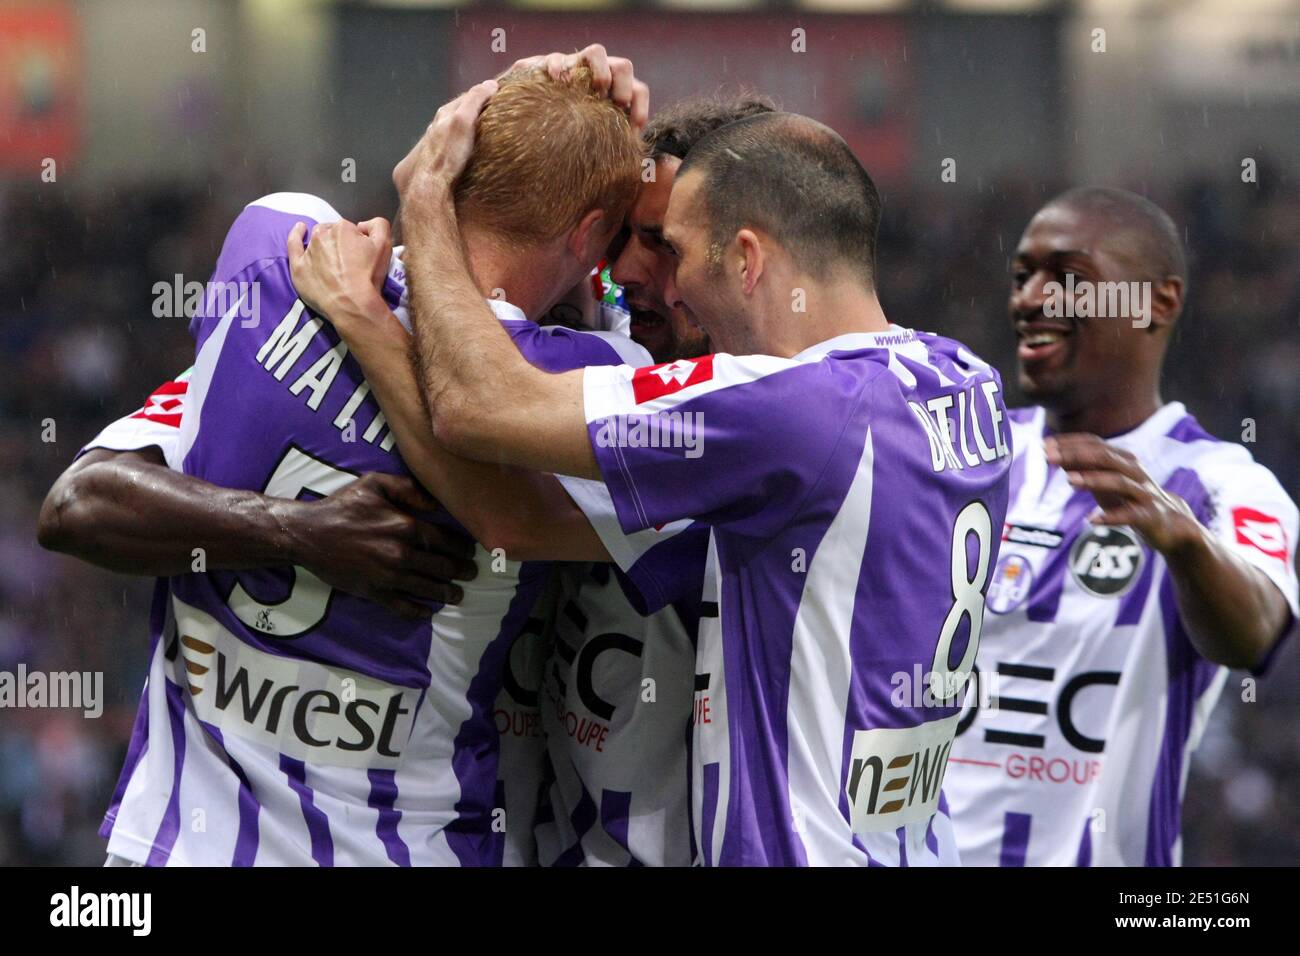 Toulouse's Jeremy Mathieu, Laurent Battles and Mohammed Fofana celebrate after scoring during the French First League Soccer match, Toulouse Football Club vs Valenciennes Football Club in toulouse, France on May 17, 2008. Toulouse won 2-1. Photo by Alex/Cameleon/ABACAPRESS.COM Stock Photo